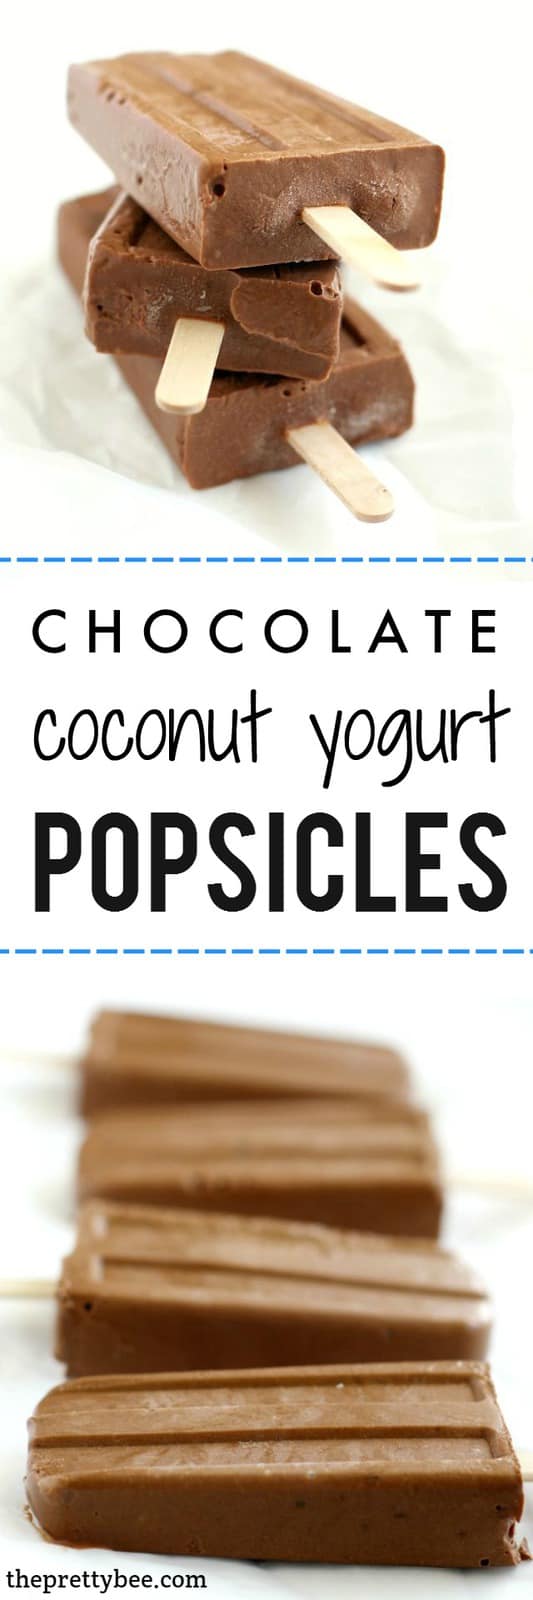 Cool off with a delicious chocolate coconut yogurt popsicle! This is an easy recipe for healthier homemade fudge pops.